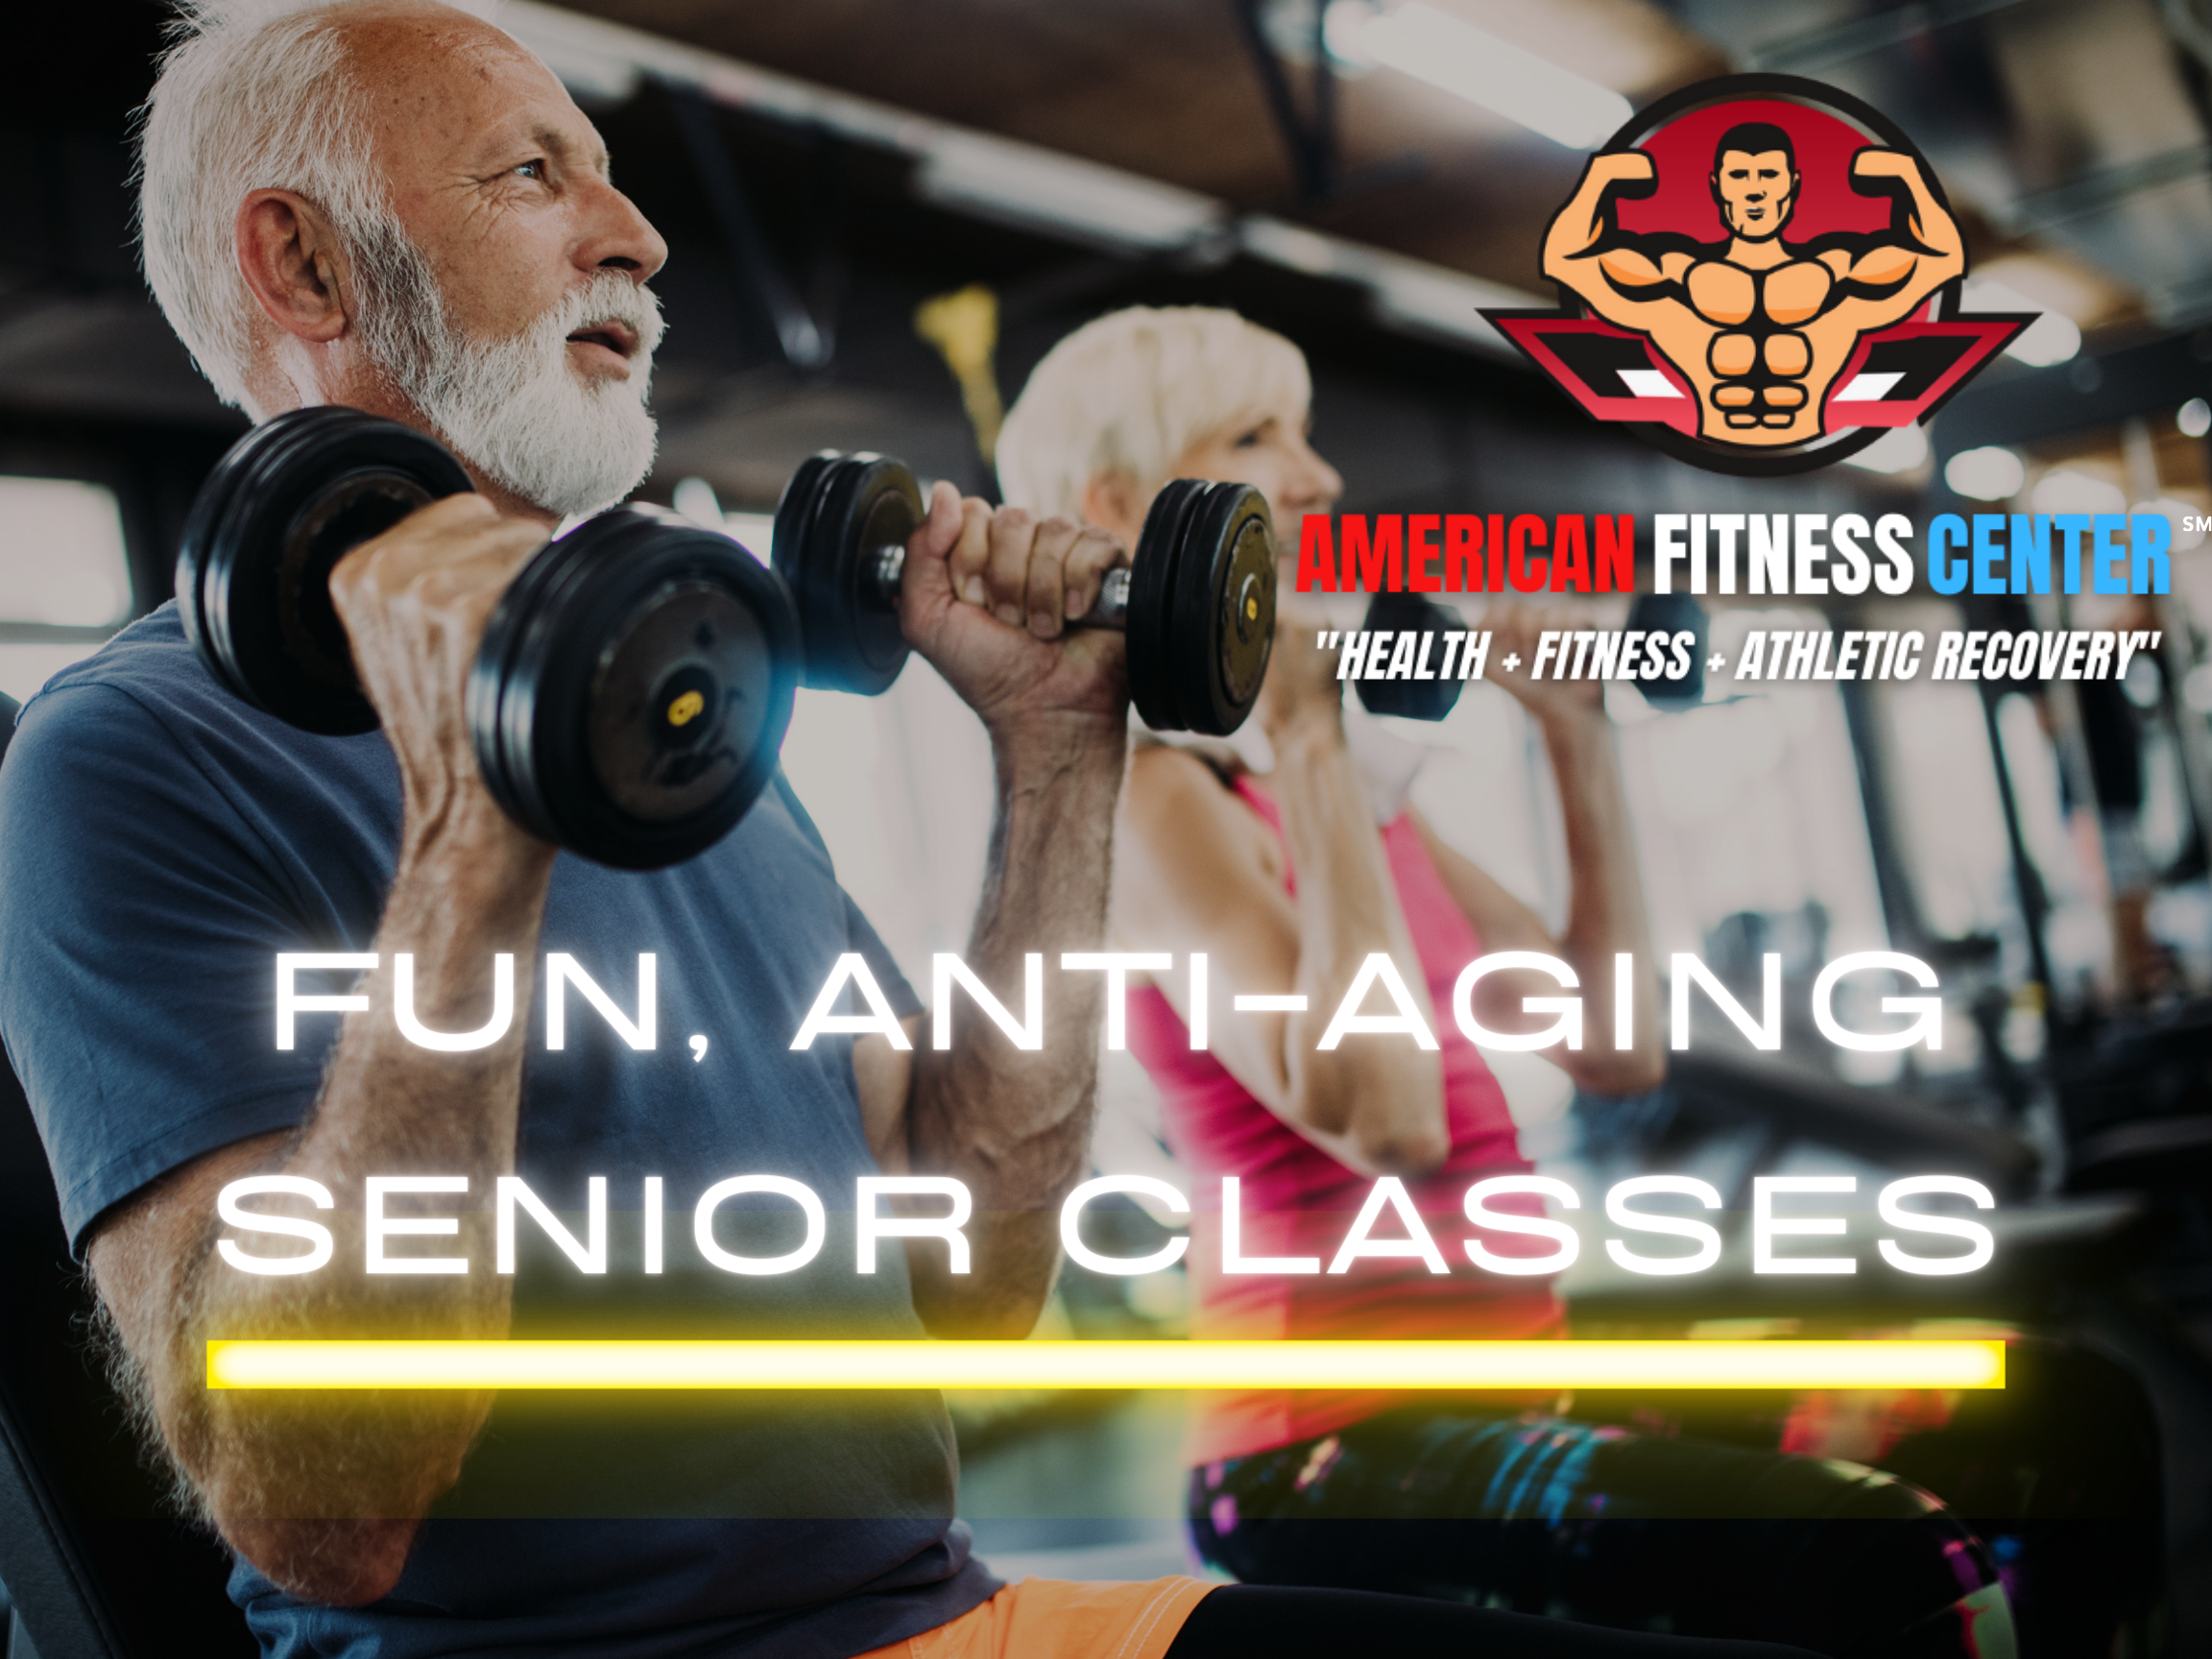 Anti-Aging-Senior-Classes-in-Roswell-GA-American-Fitness-Center-West-Roswell